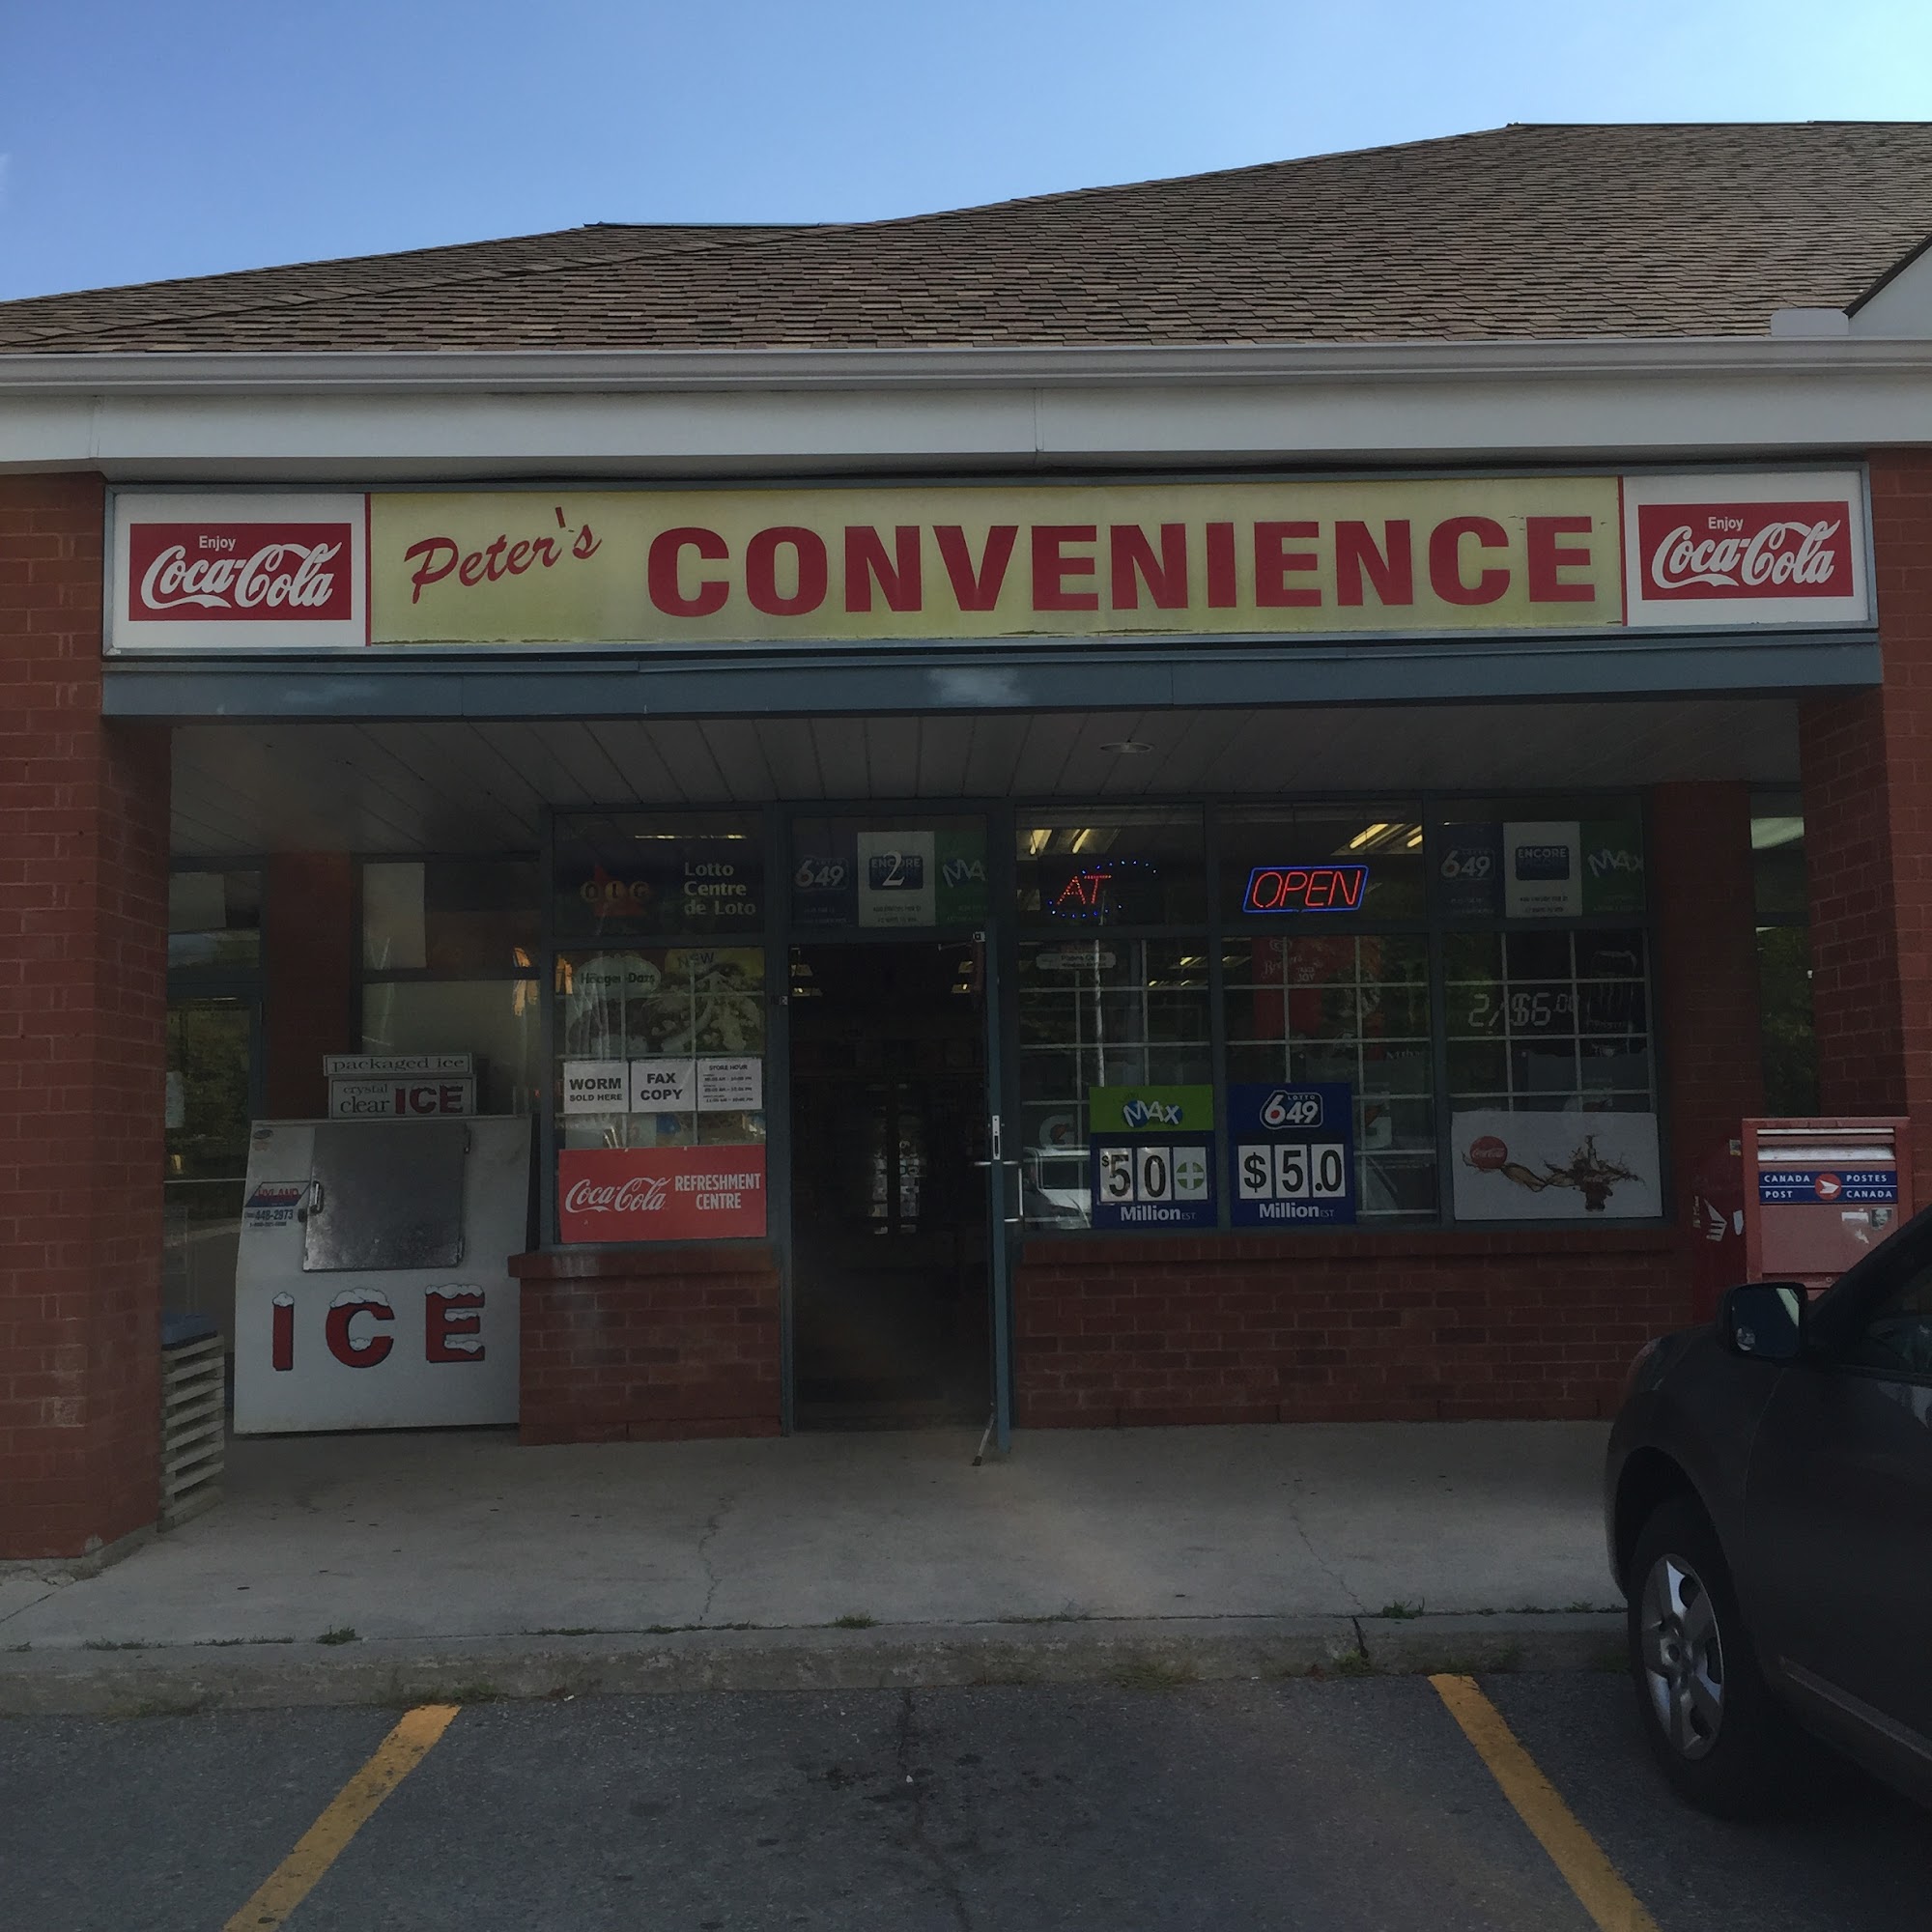 Peter's Convenience